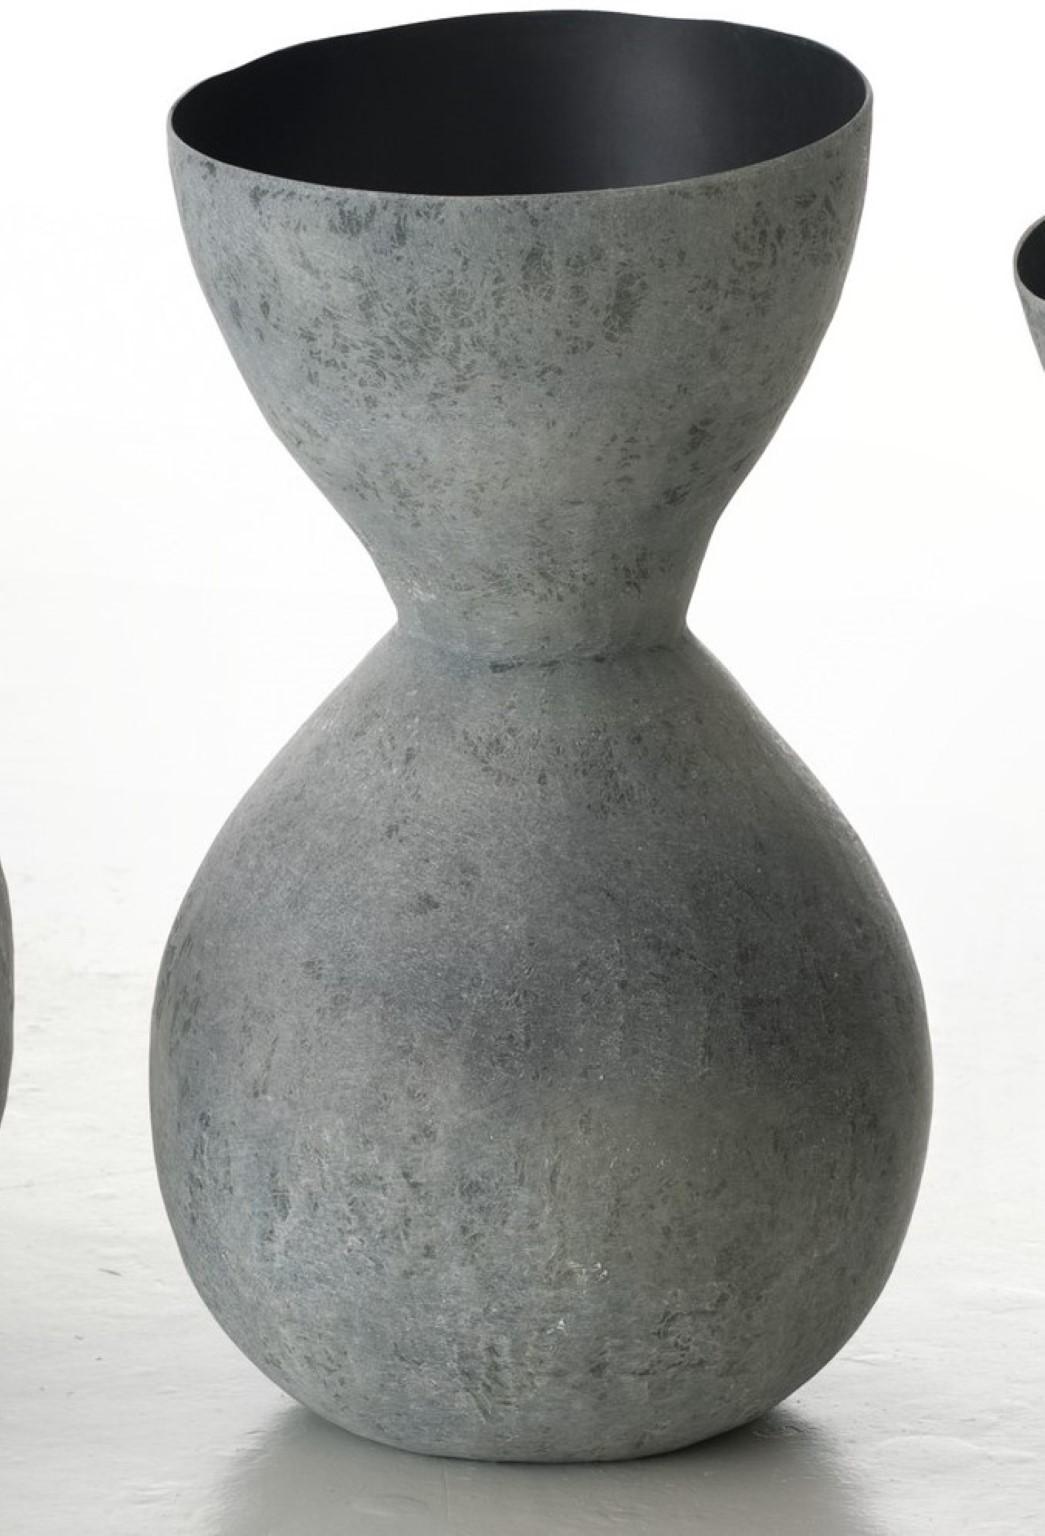 Incline Vase 55 by Imperfettolab
Dimensions: Ø 30 x H 55 cm
Materials: Raw material


Imperfetto Lab
Who we are ? We are a family.
Verter Turroni, Emanuela Ravelli and our children Elia, Margherita and Eusebio.
All together, we are separate parts